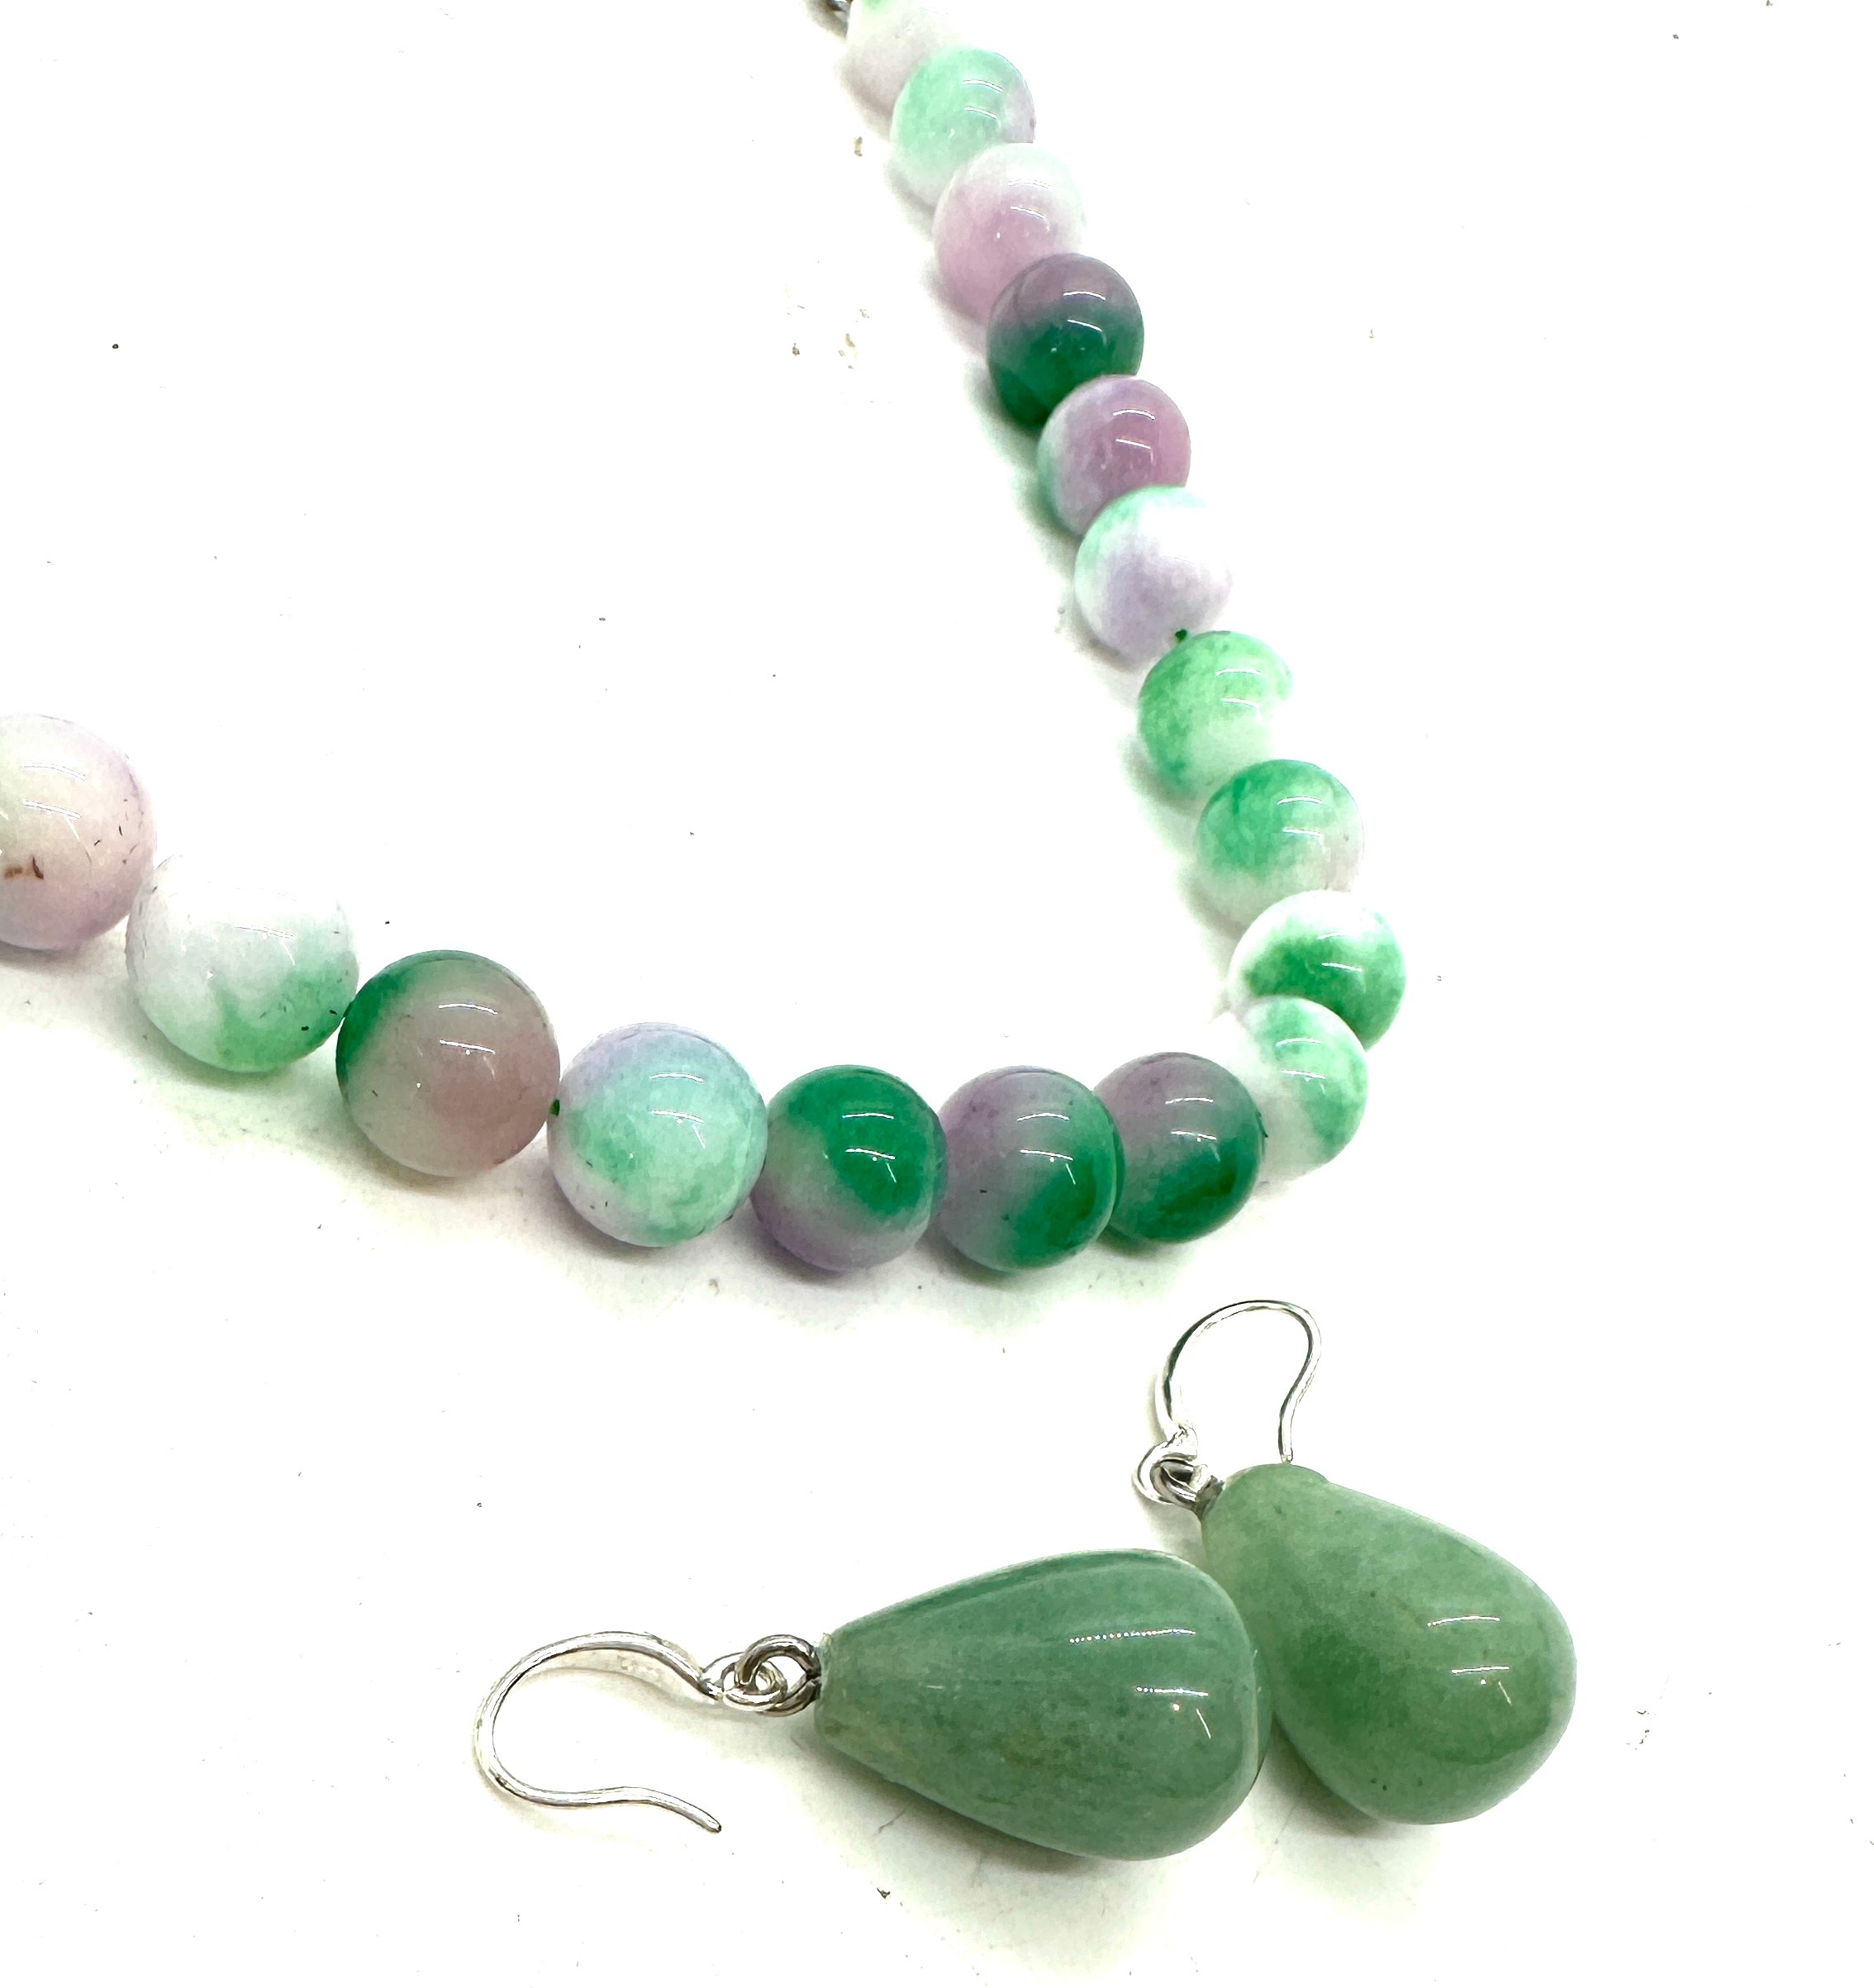 Lavender jade necklace and 925 earrings - Image 3 of 4